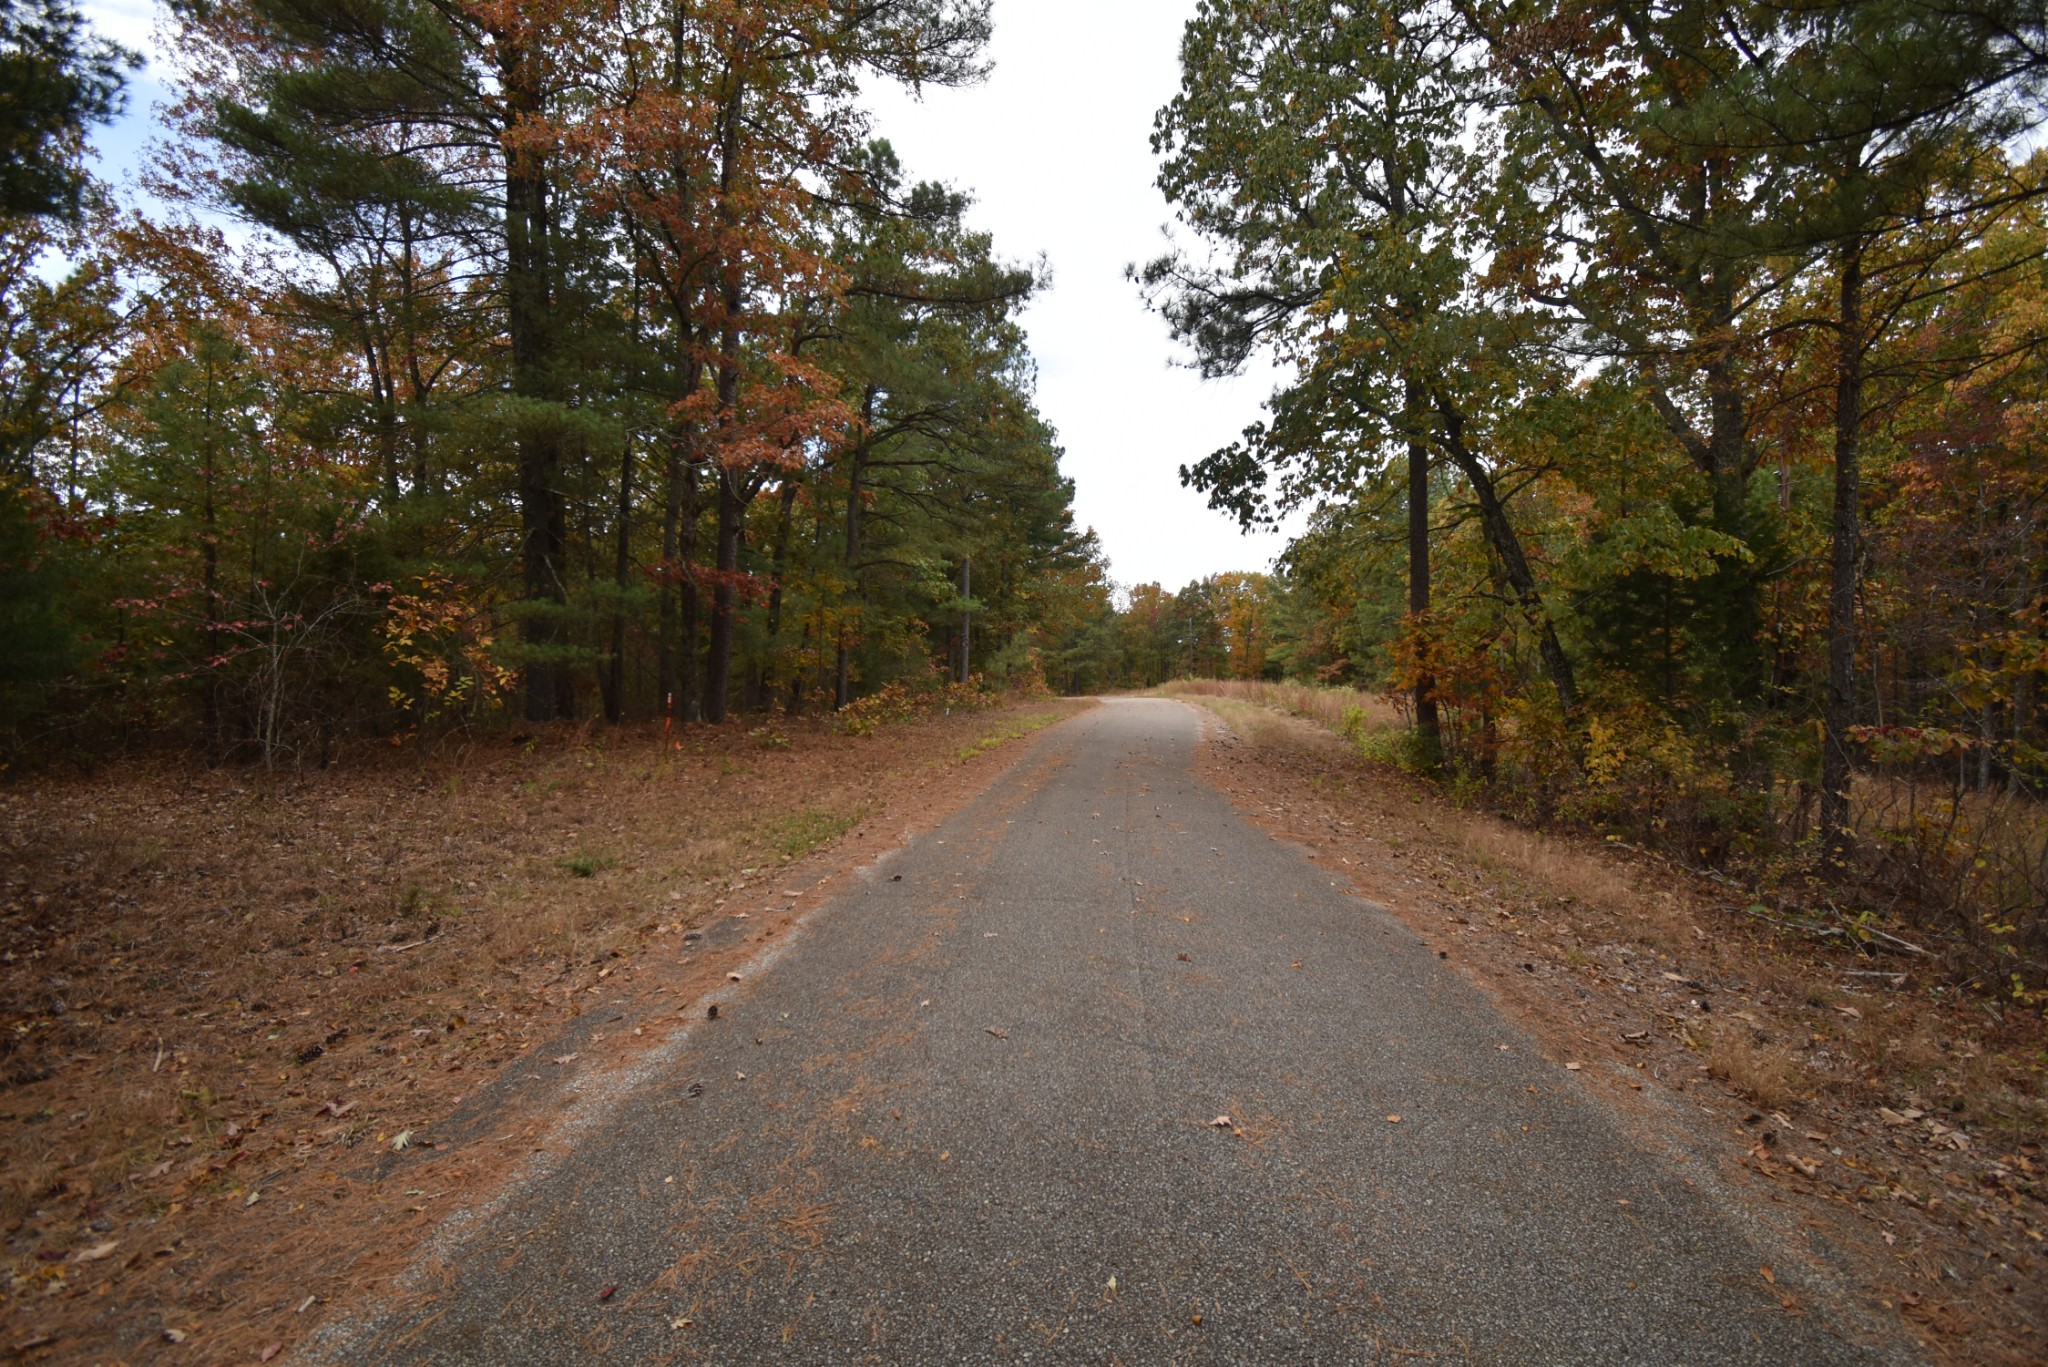 a view of a dirt road with large trees